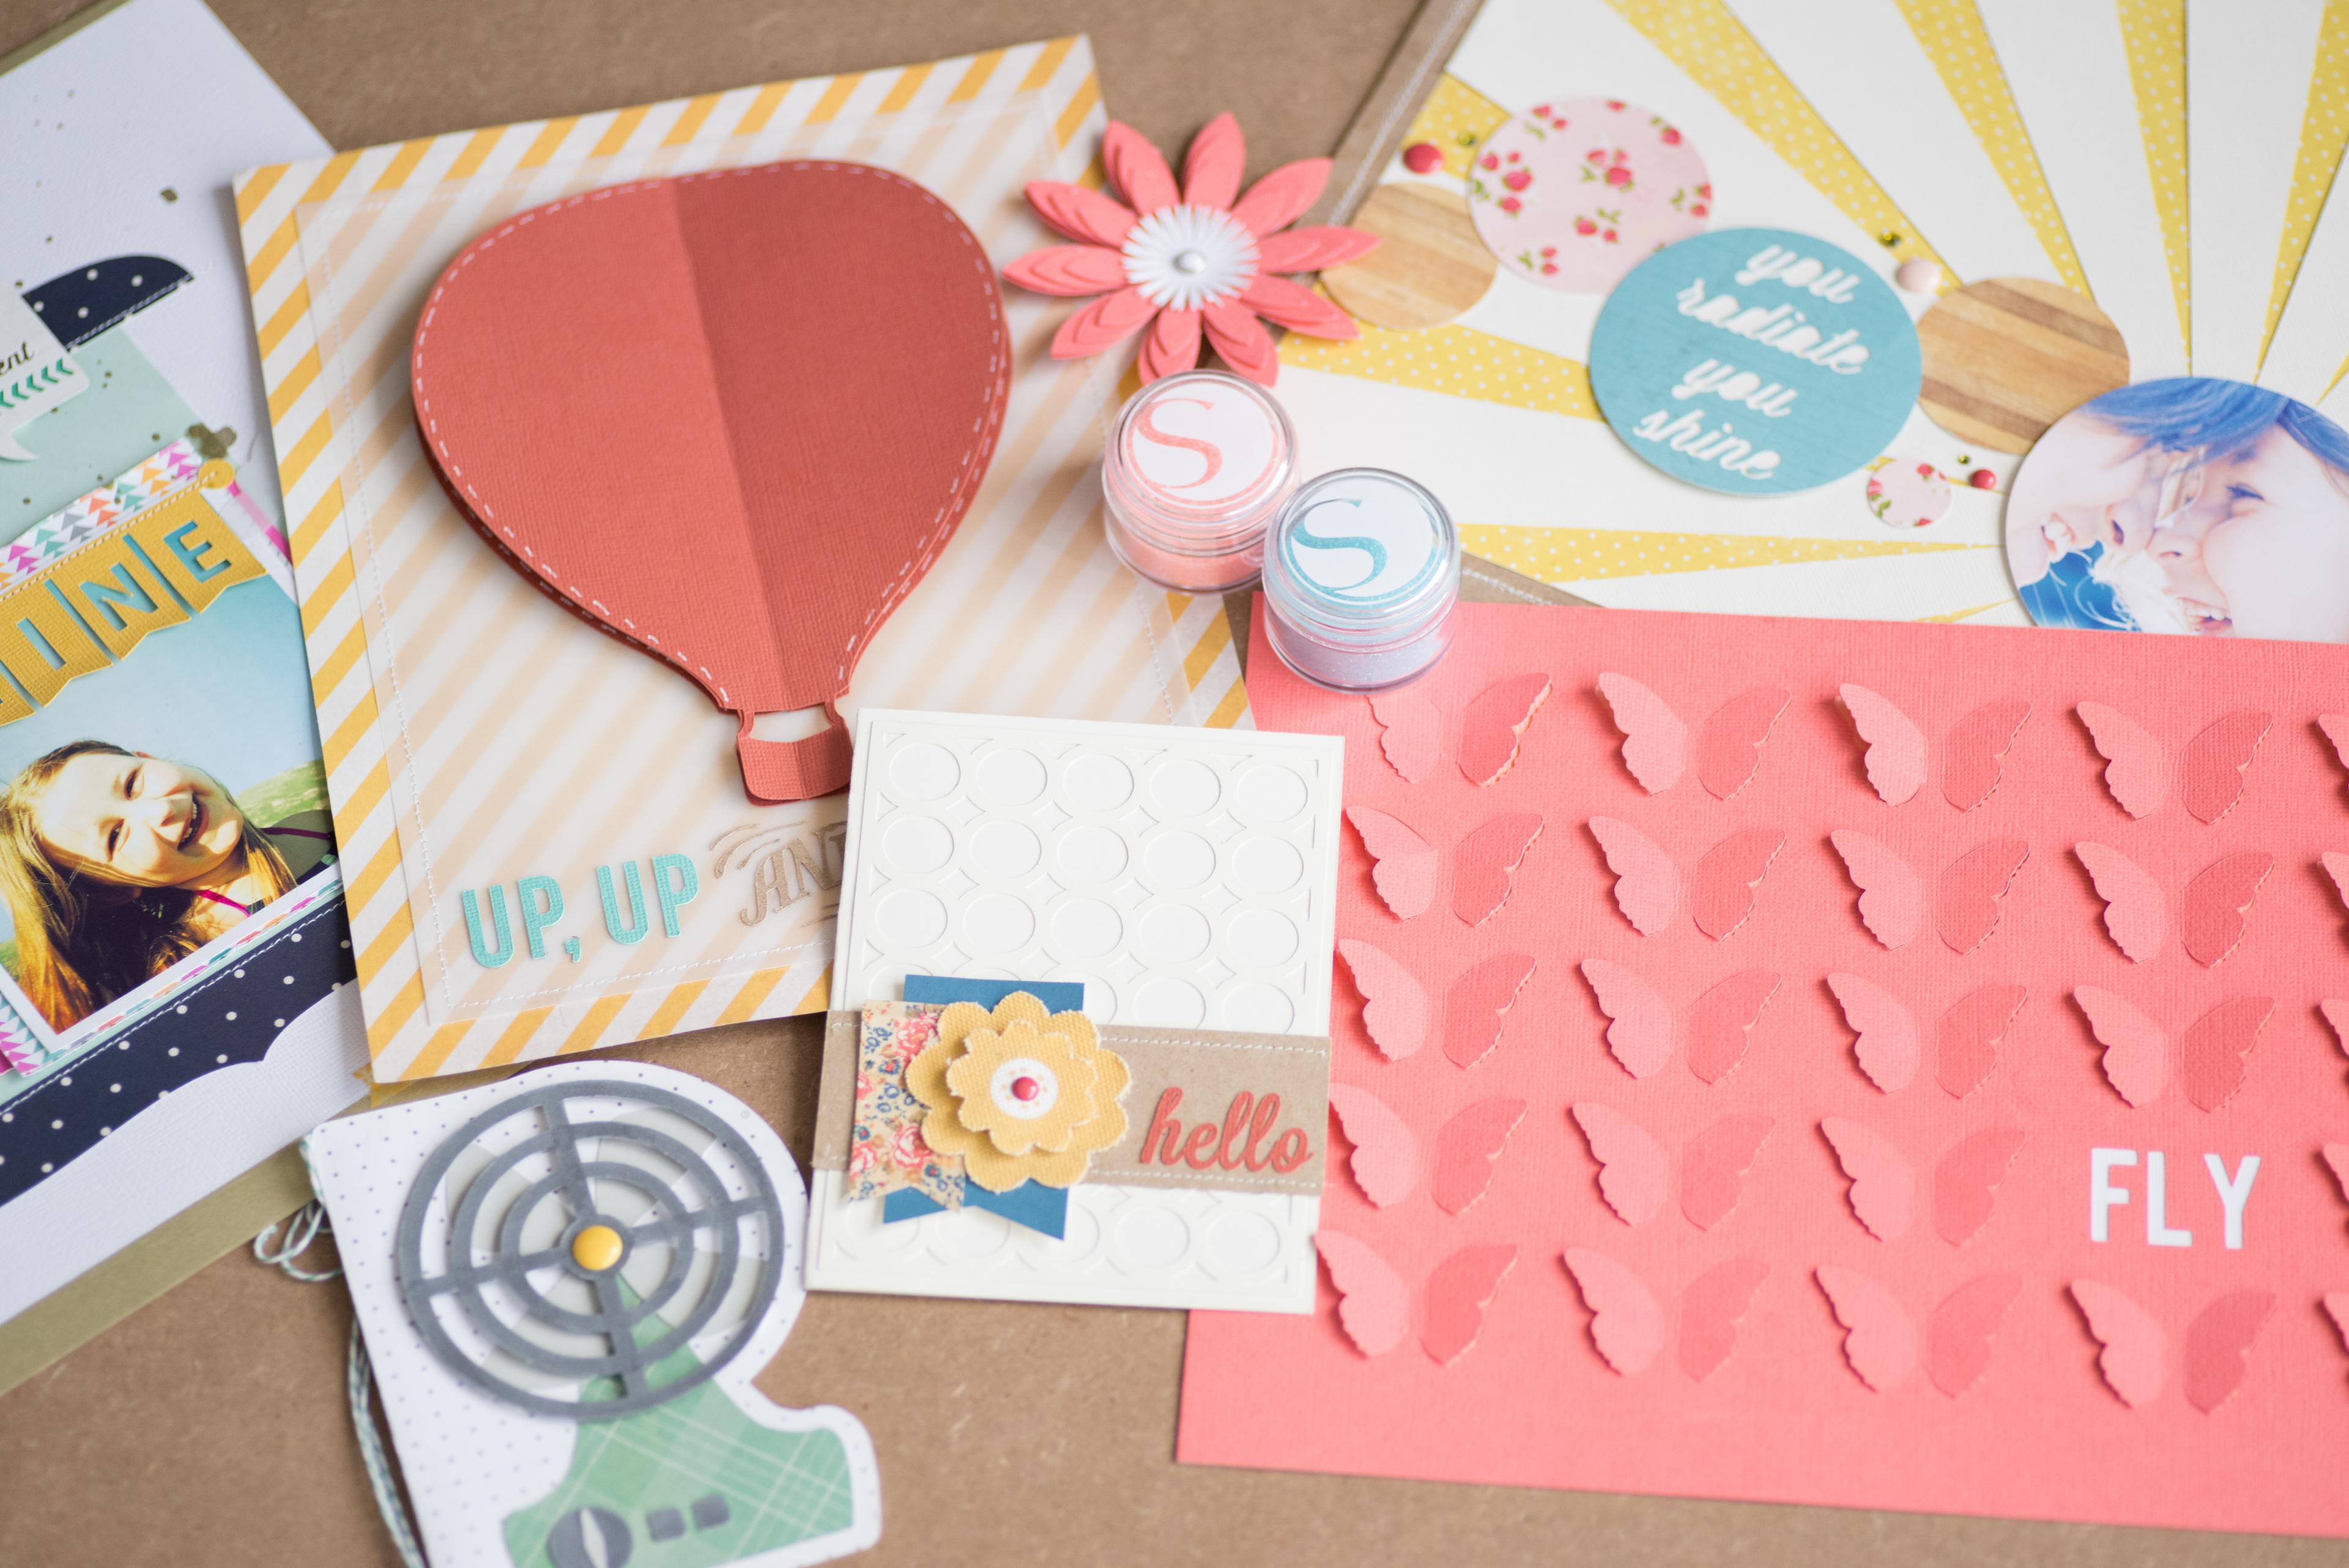 Usage of cutting plotters for scrapbooking